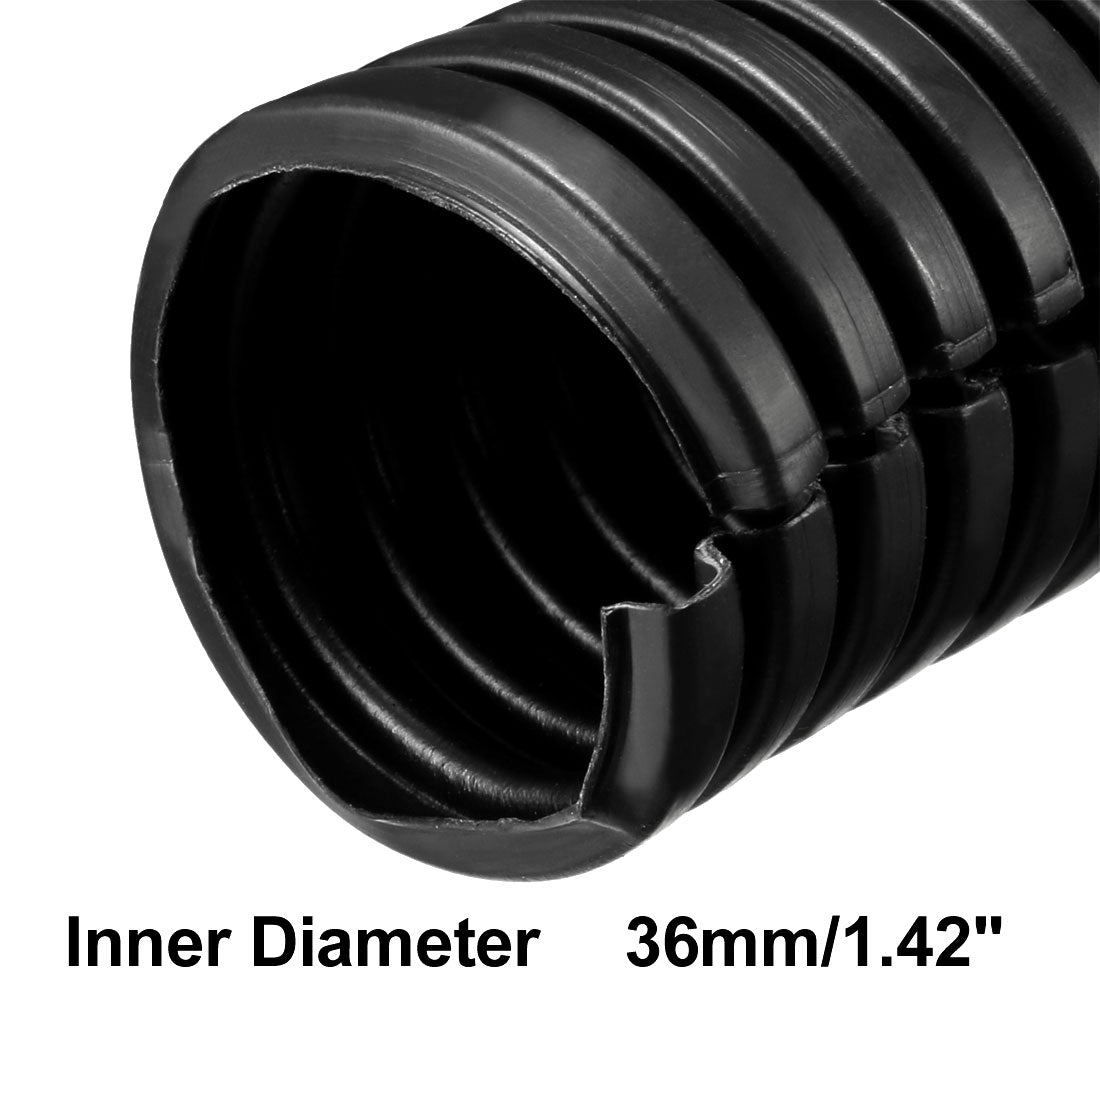 uxcell Uxcell 5 M 36 x 42.5 mm PE Split Corrugated Conduit Tube for Garden,Office Black